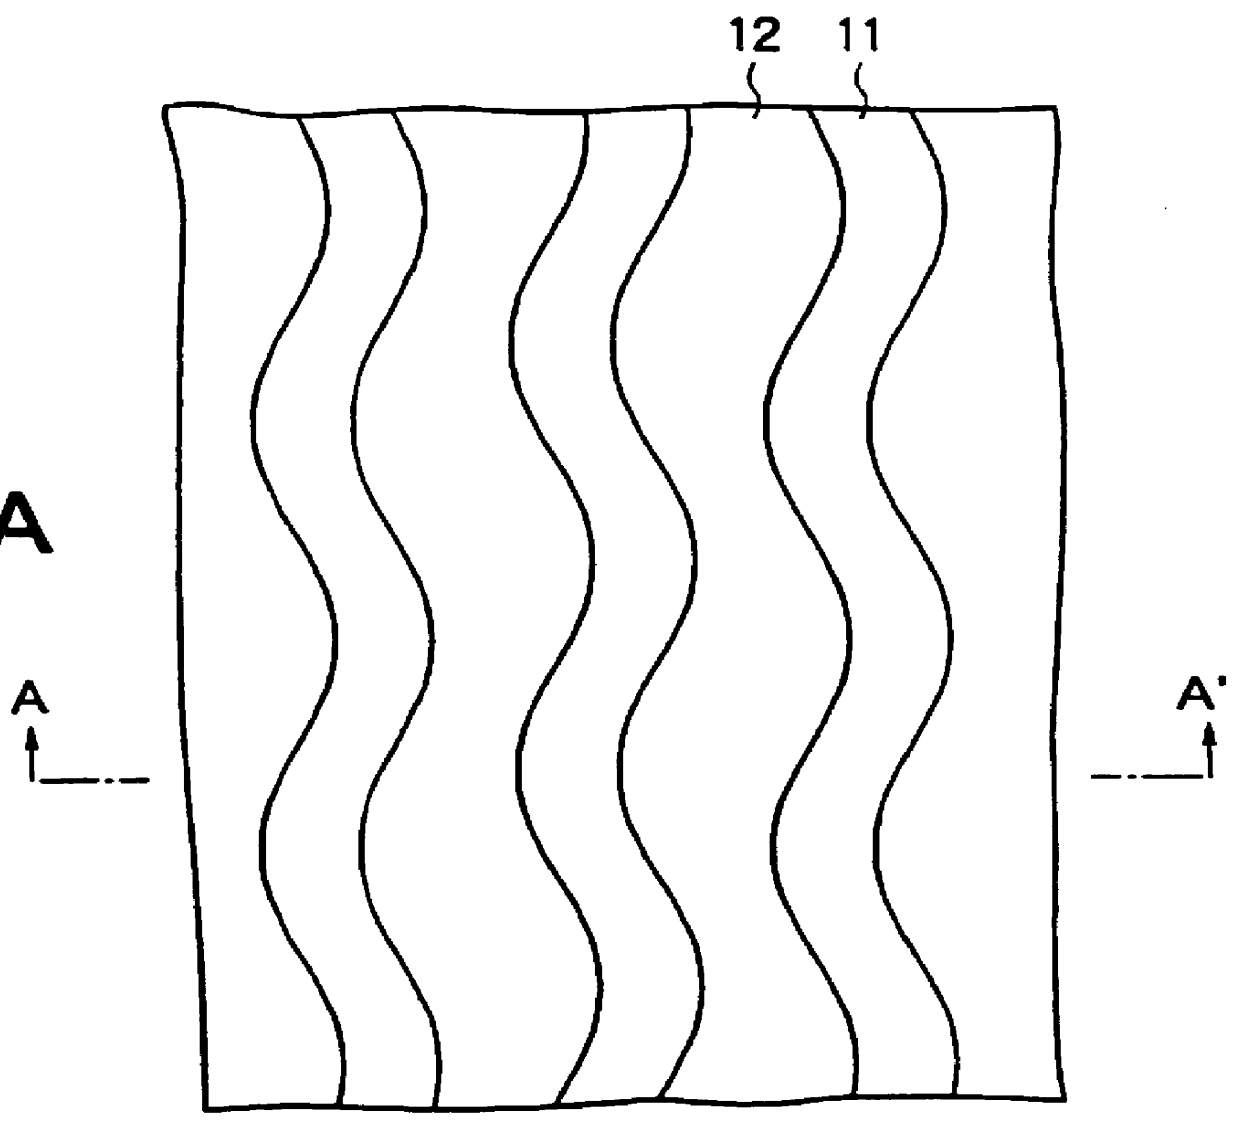 Optical phase-change disc having a grooved substrate, with the groove having specific wobbled and non-wobbled regions